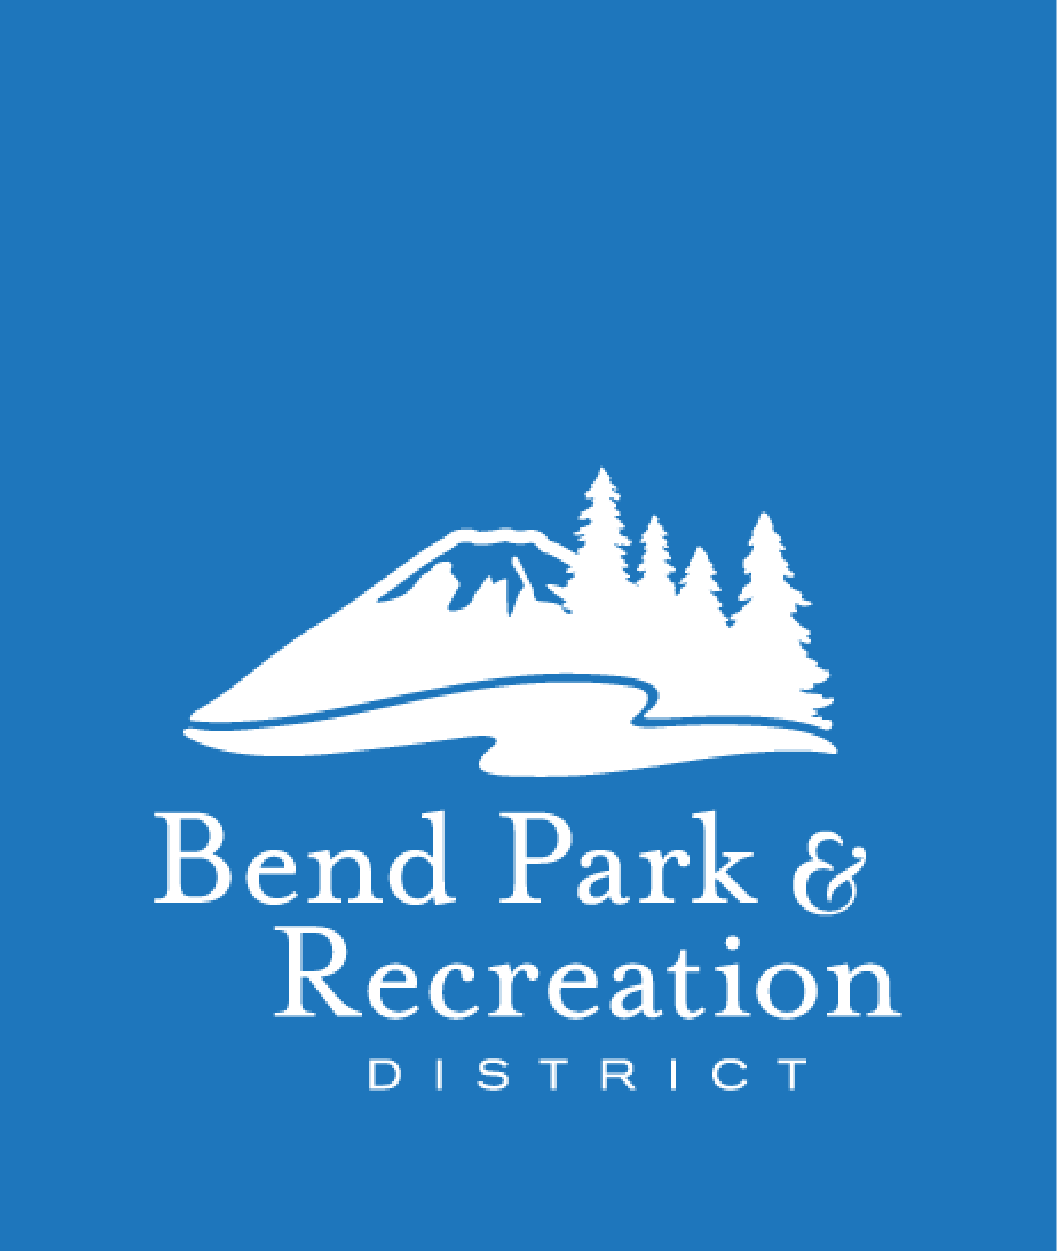 Bend Park and Recreation District logo.